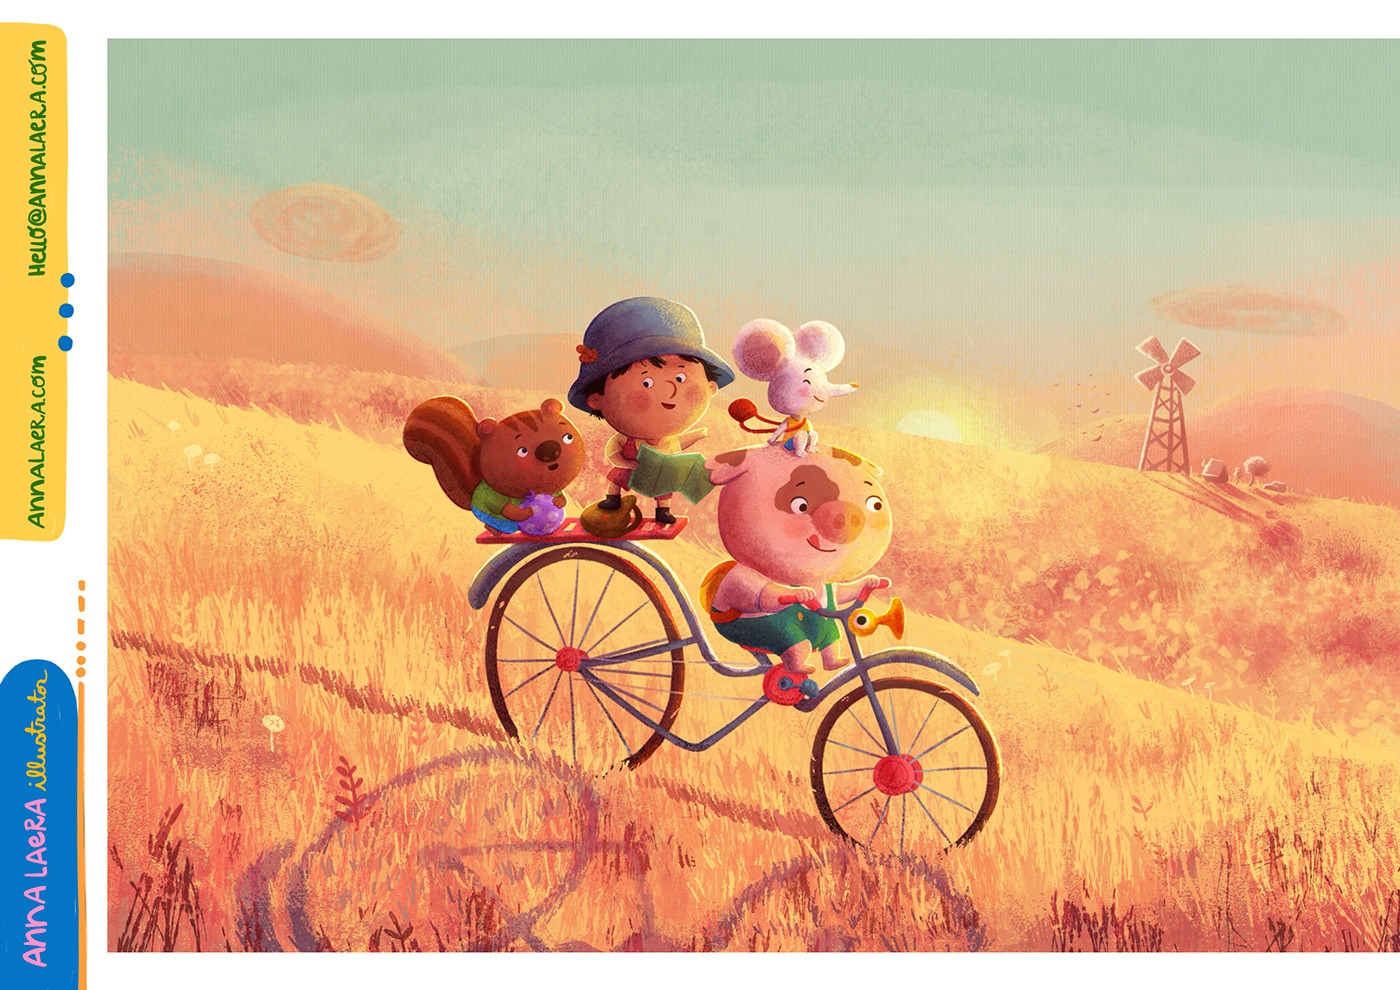 Mouse, pig, squirrel and a kid on a bike